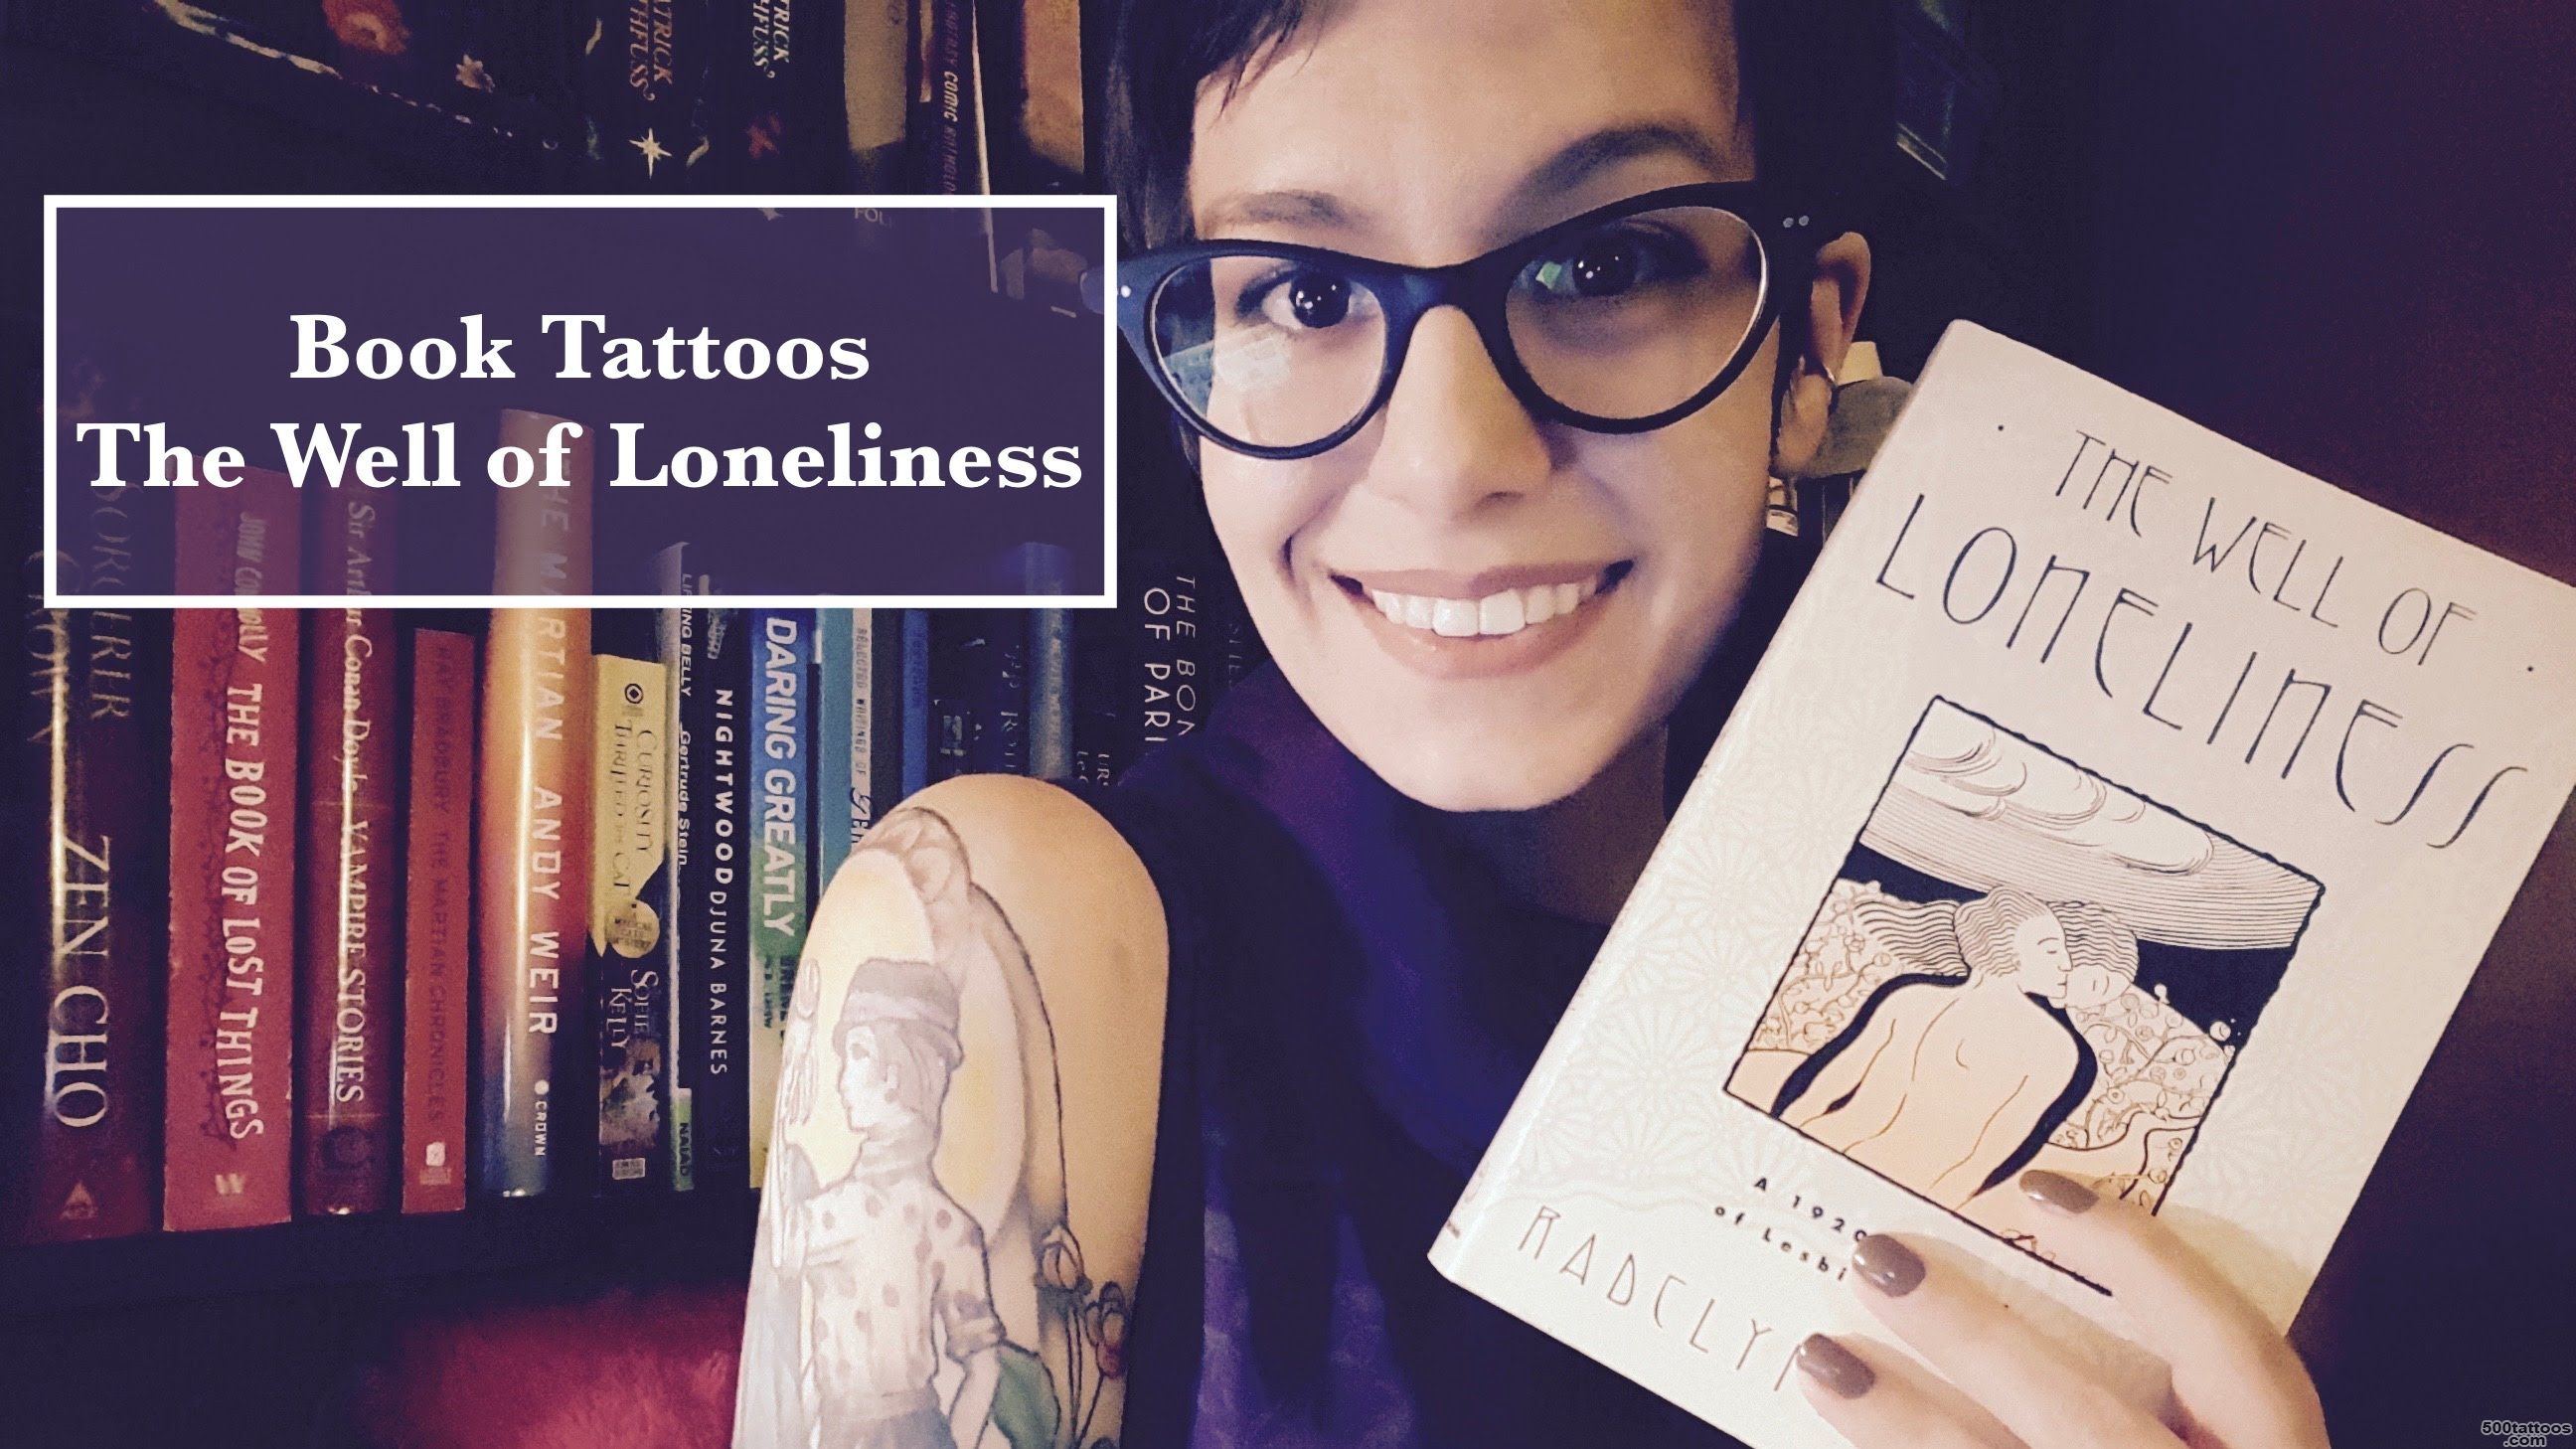 Book Tattoo  The Well of Loneliness   YouTube_13